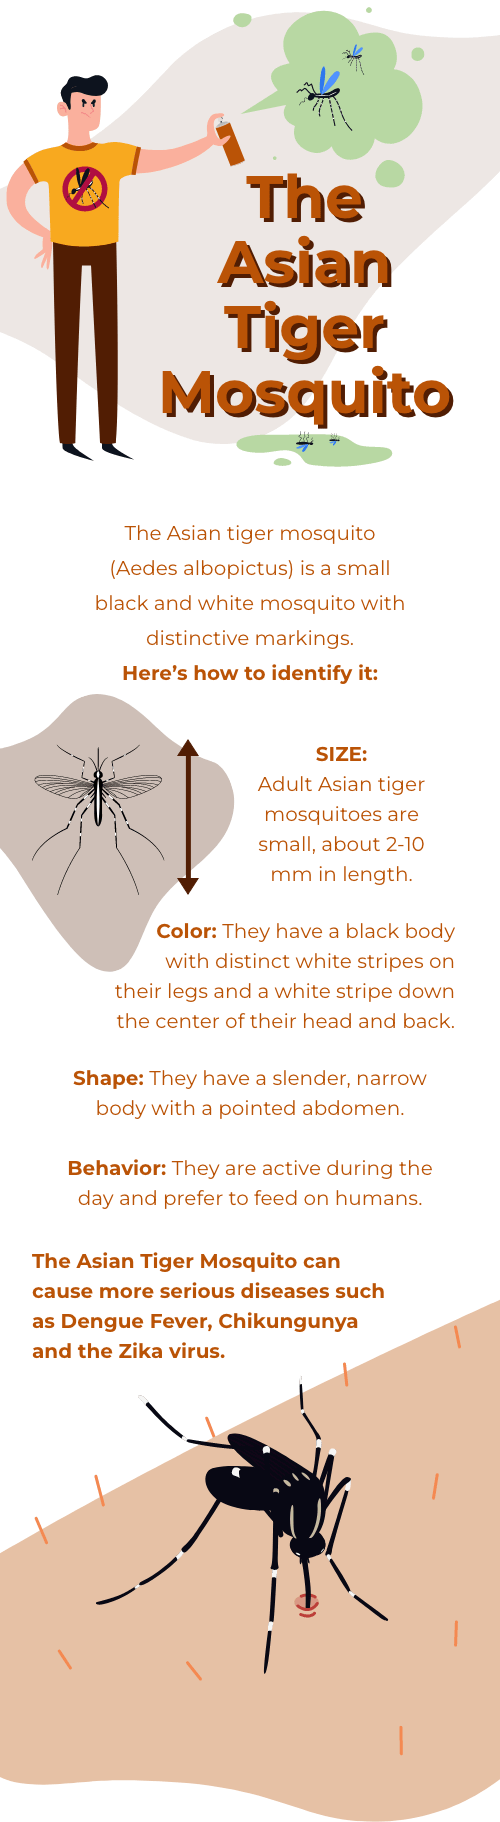 www.znewsservice.com expert warns americans to be vigilant as disease spreading insect spreads rapidly across america asian tiger mosquito 1 1.png